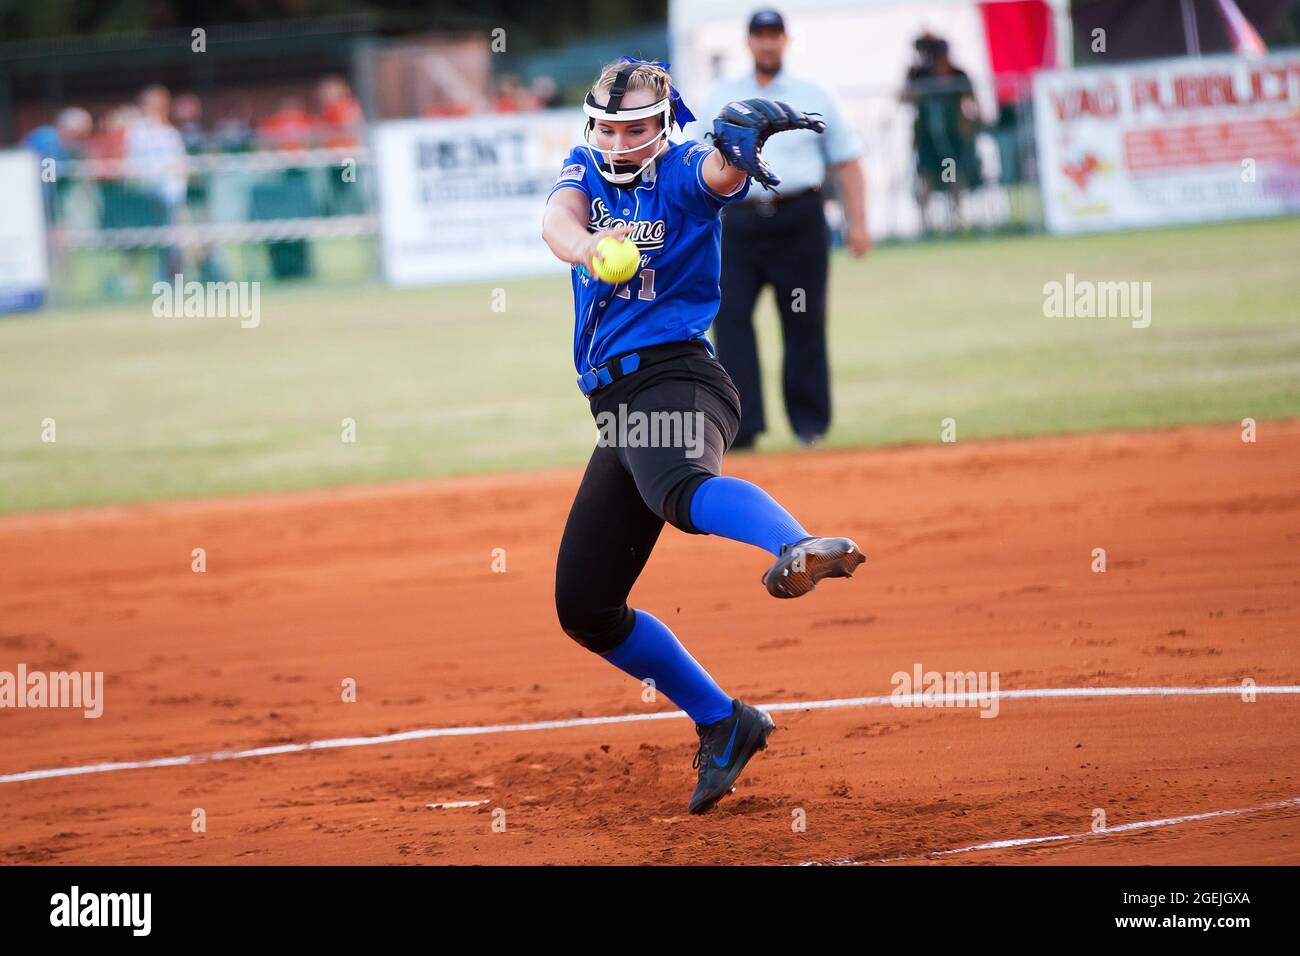 Saronno, Italy. 20th Aug, 2021. BARNHILL Kelly pitcher of the team Saronno from Italy during Women's European Cup Winners Cup 2021, Softball in Saronno, Italy, August 20 2021 Credit: Independent Photo Agency/Alamy Live News Stock Photo